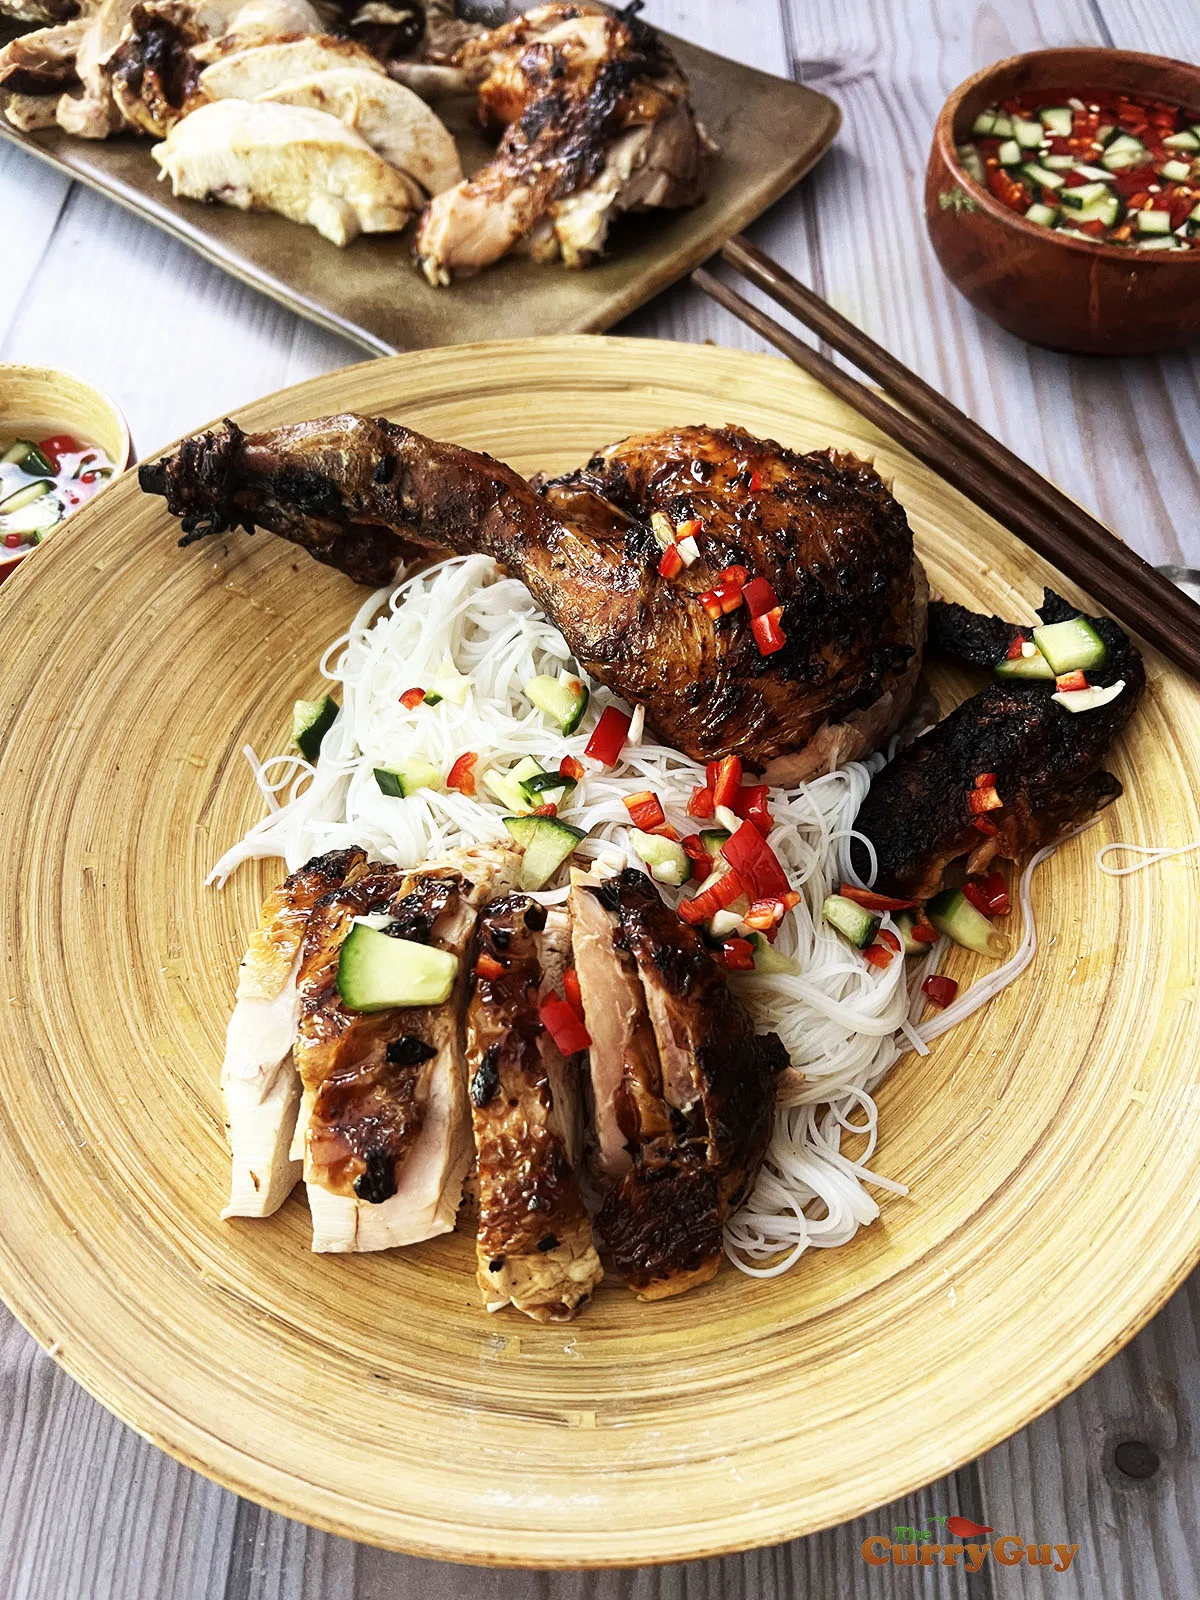 Vietnames chicken served with nuoc cham on rice vermicelli noodles.